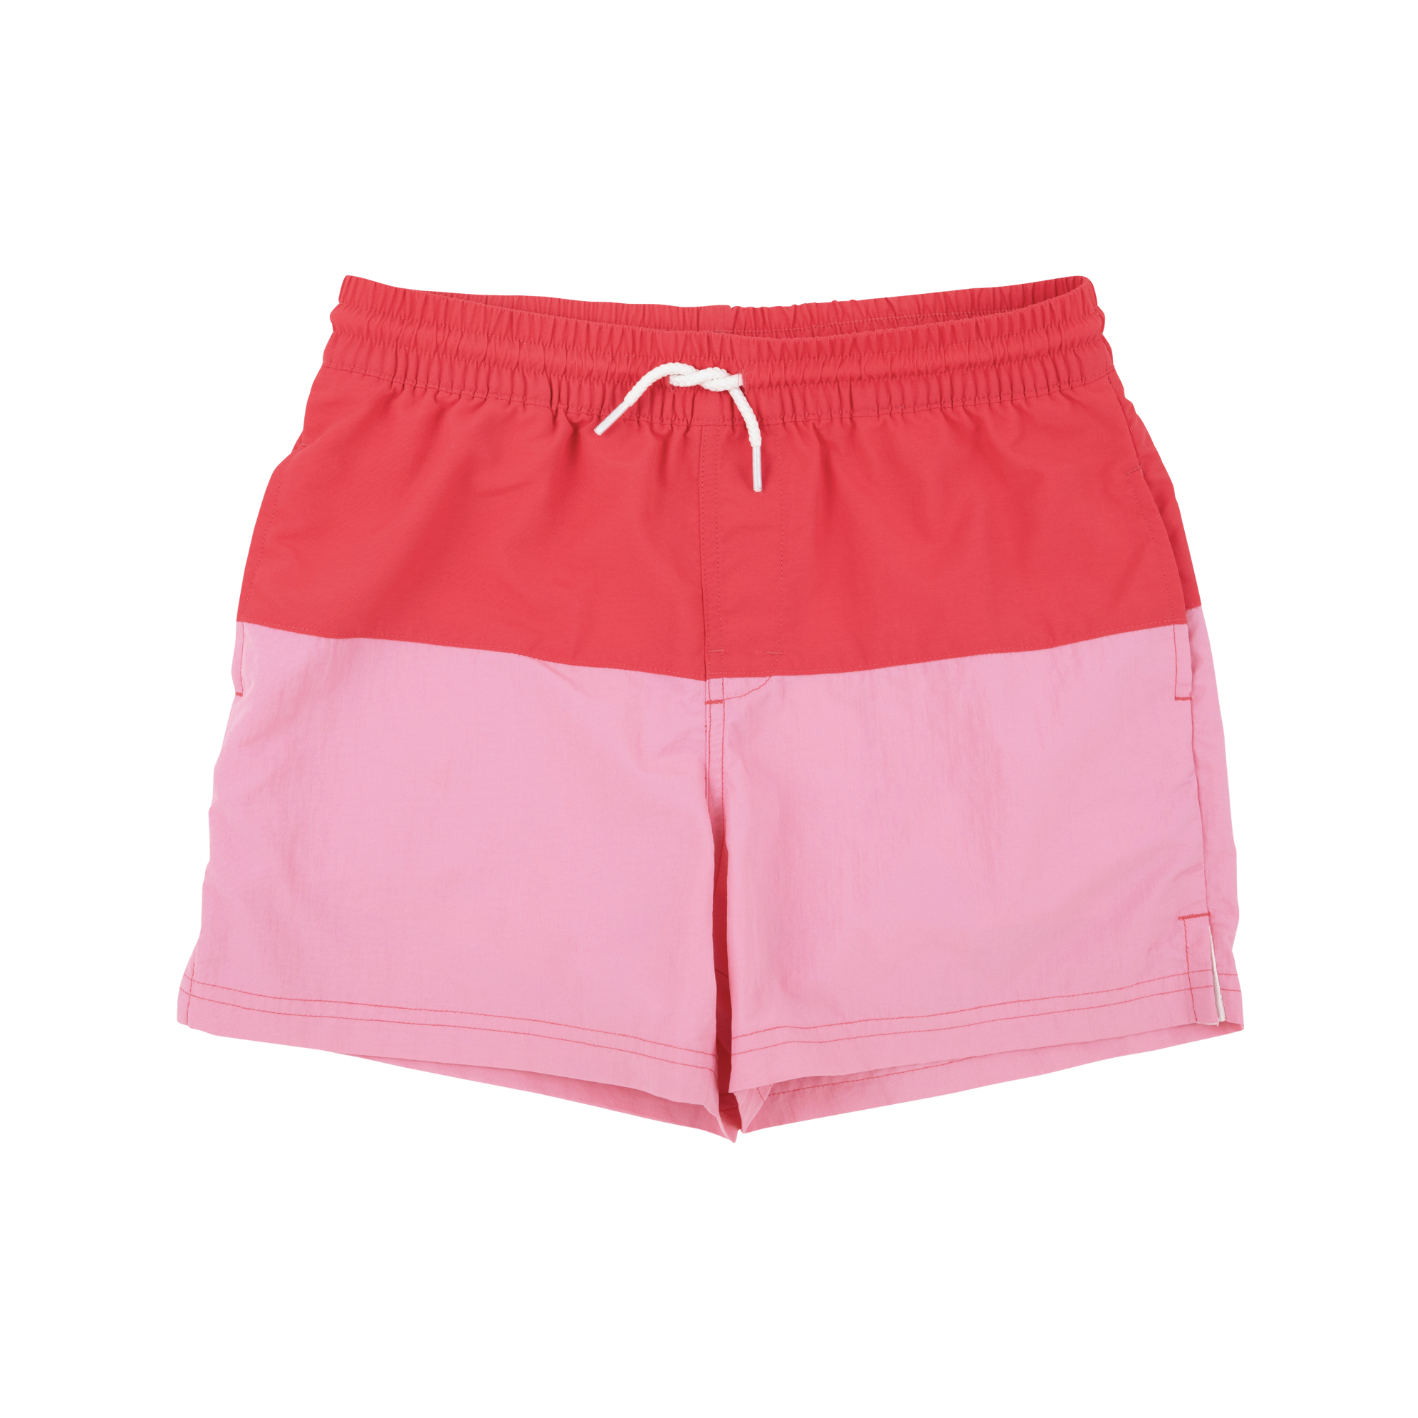 TBBC Country Club Colorblock Trunk Red/Hot Pink - Spoiled Sweet Bouti ...